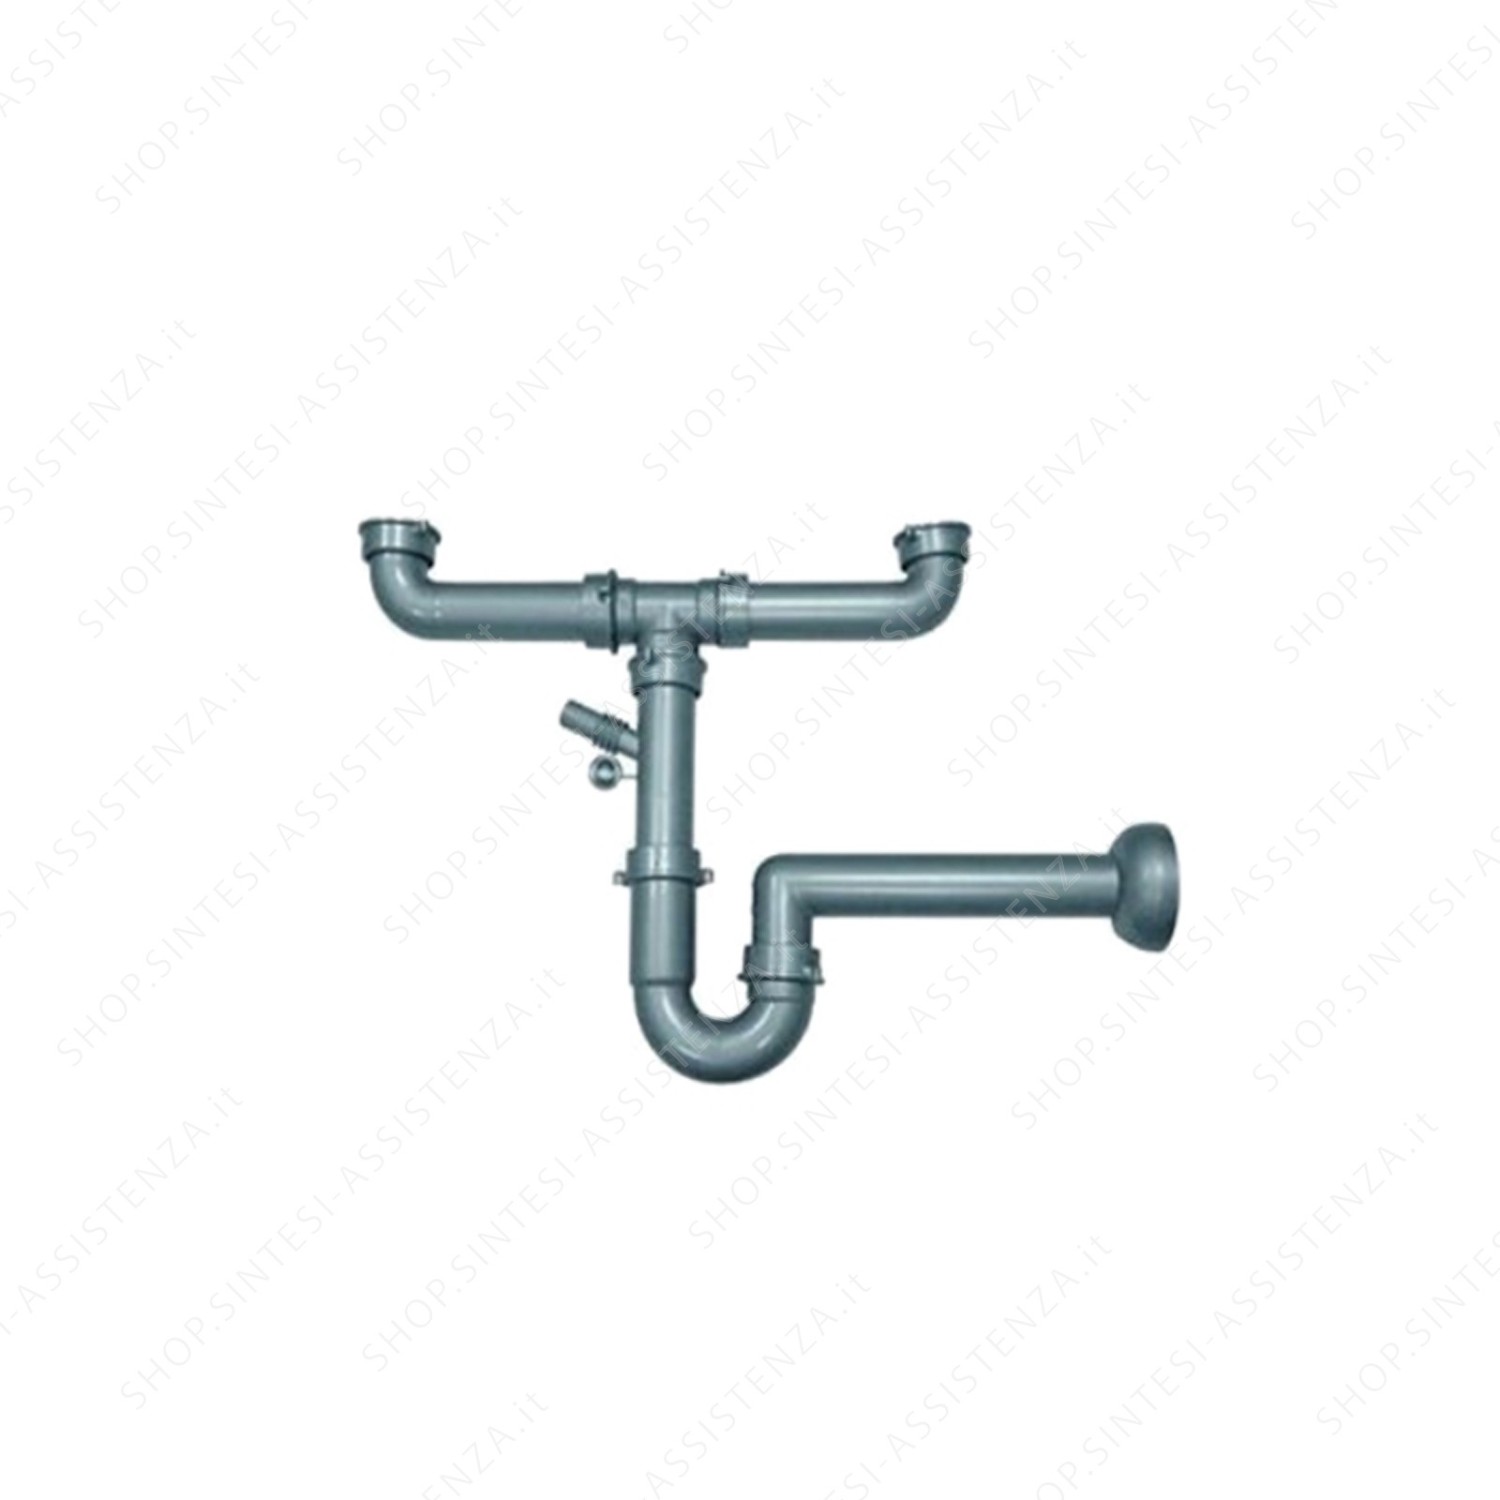 2 WAY SIPHON FOR 2 BOWL SINKS WITH CENTRAL DISHWASHER DRAIN CONNECTION 112.0068.244 - 112.0068.244 FR